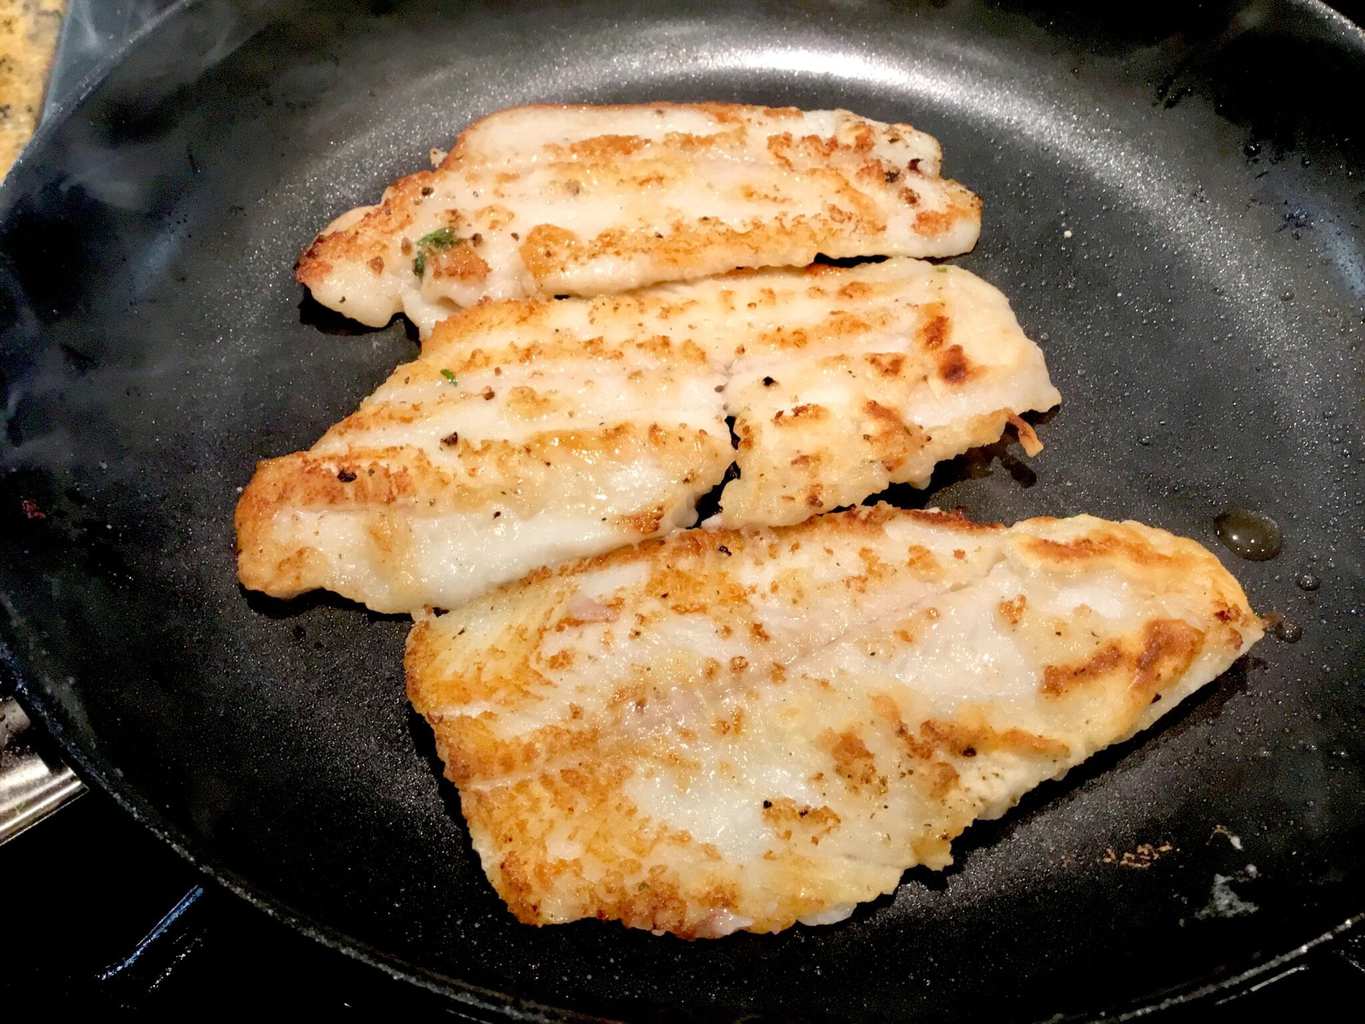 Dover sole fillets cooking in a frypan